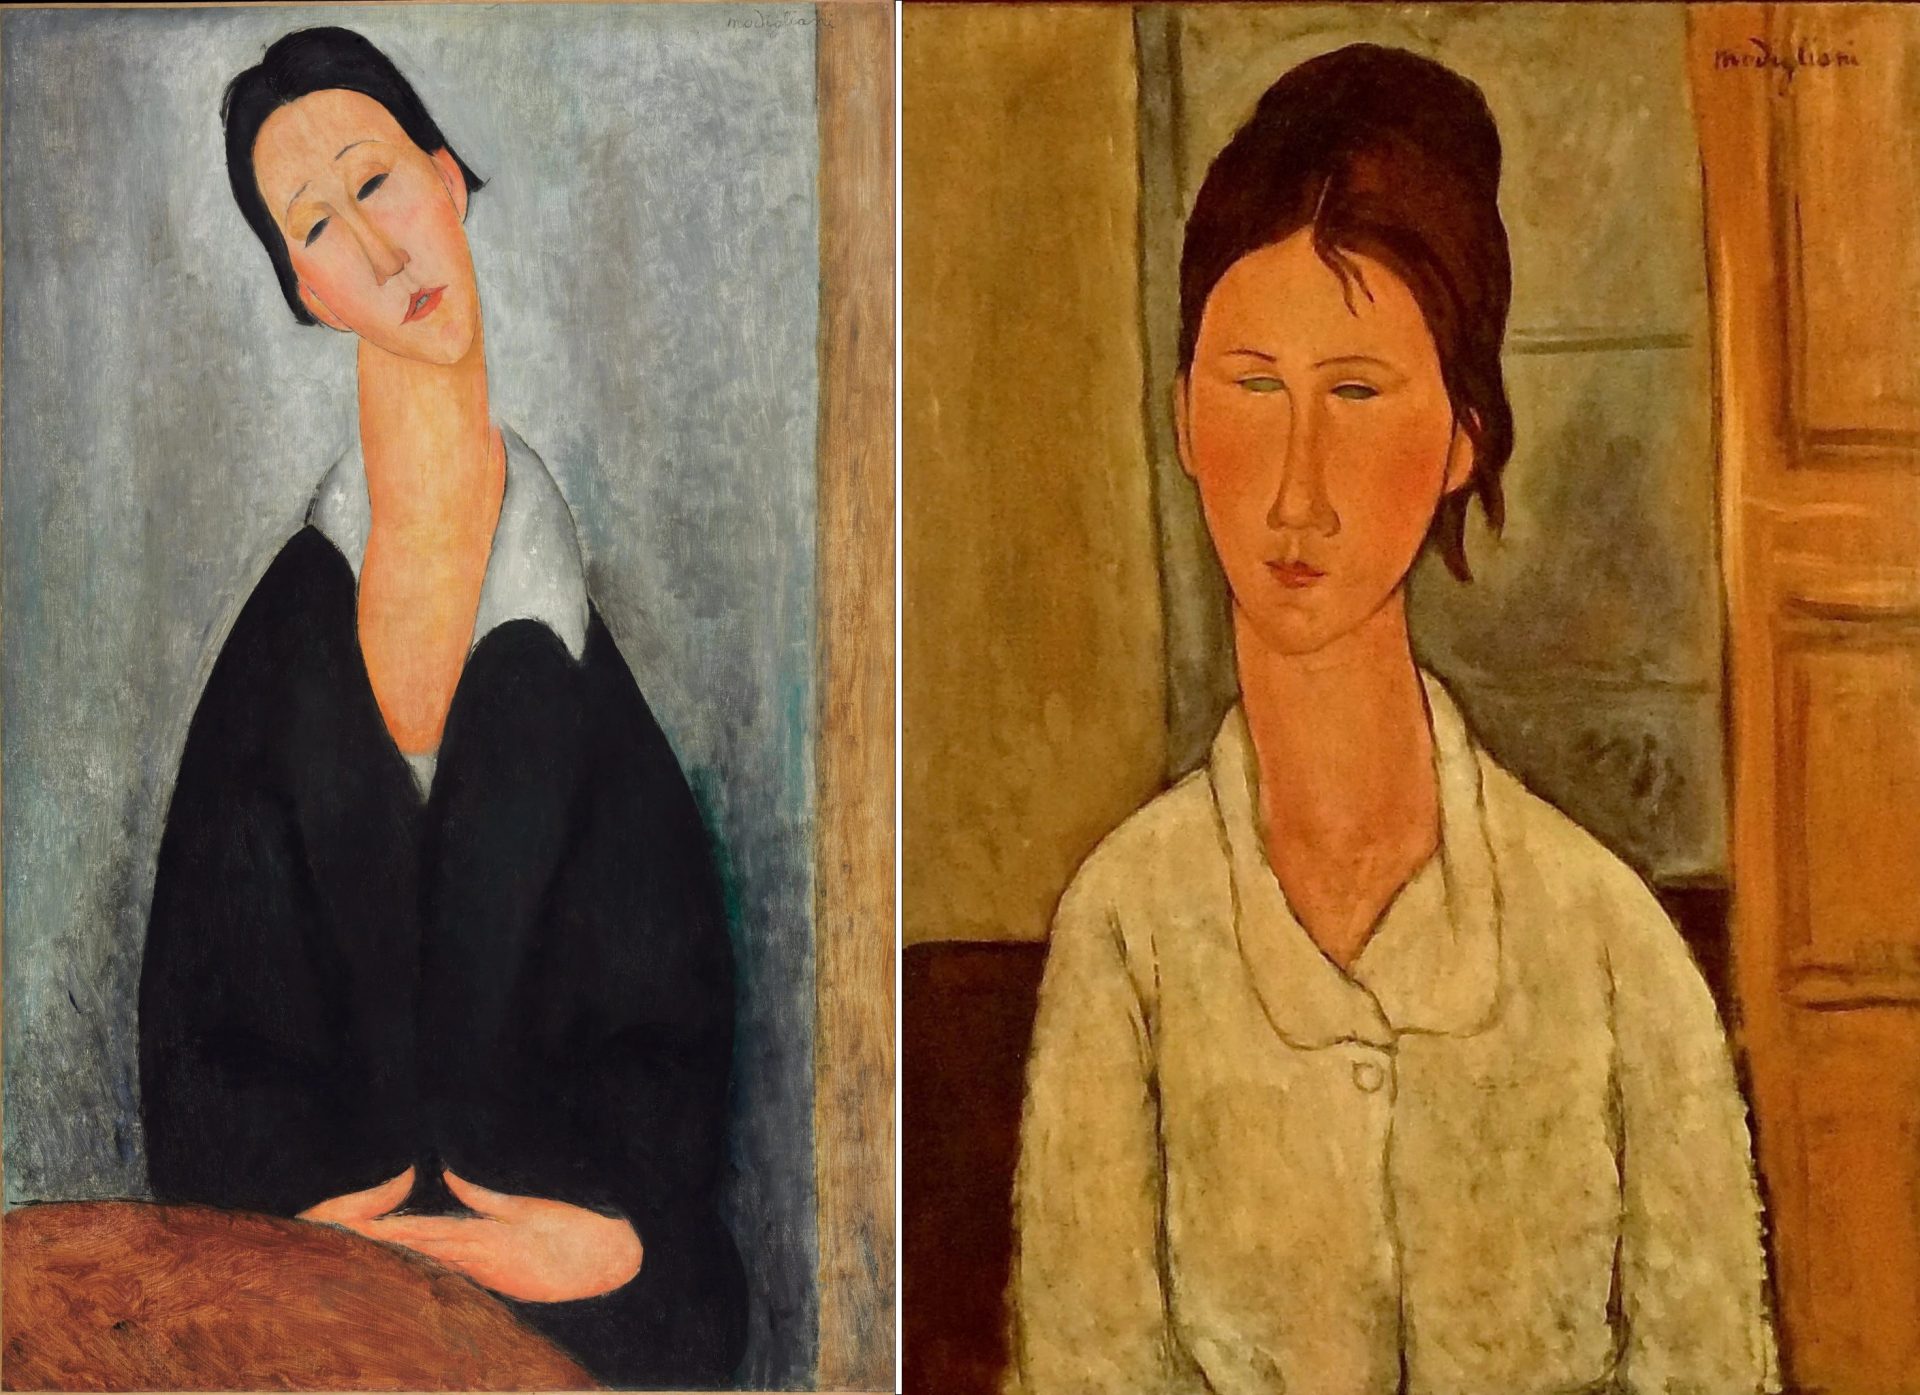 A collage of two paintings, one features a woman in a white blouse, the other features a woman in a black dress sitting at a table.